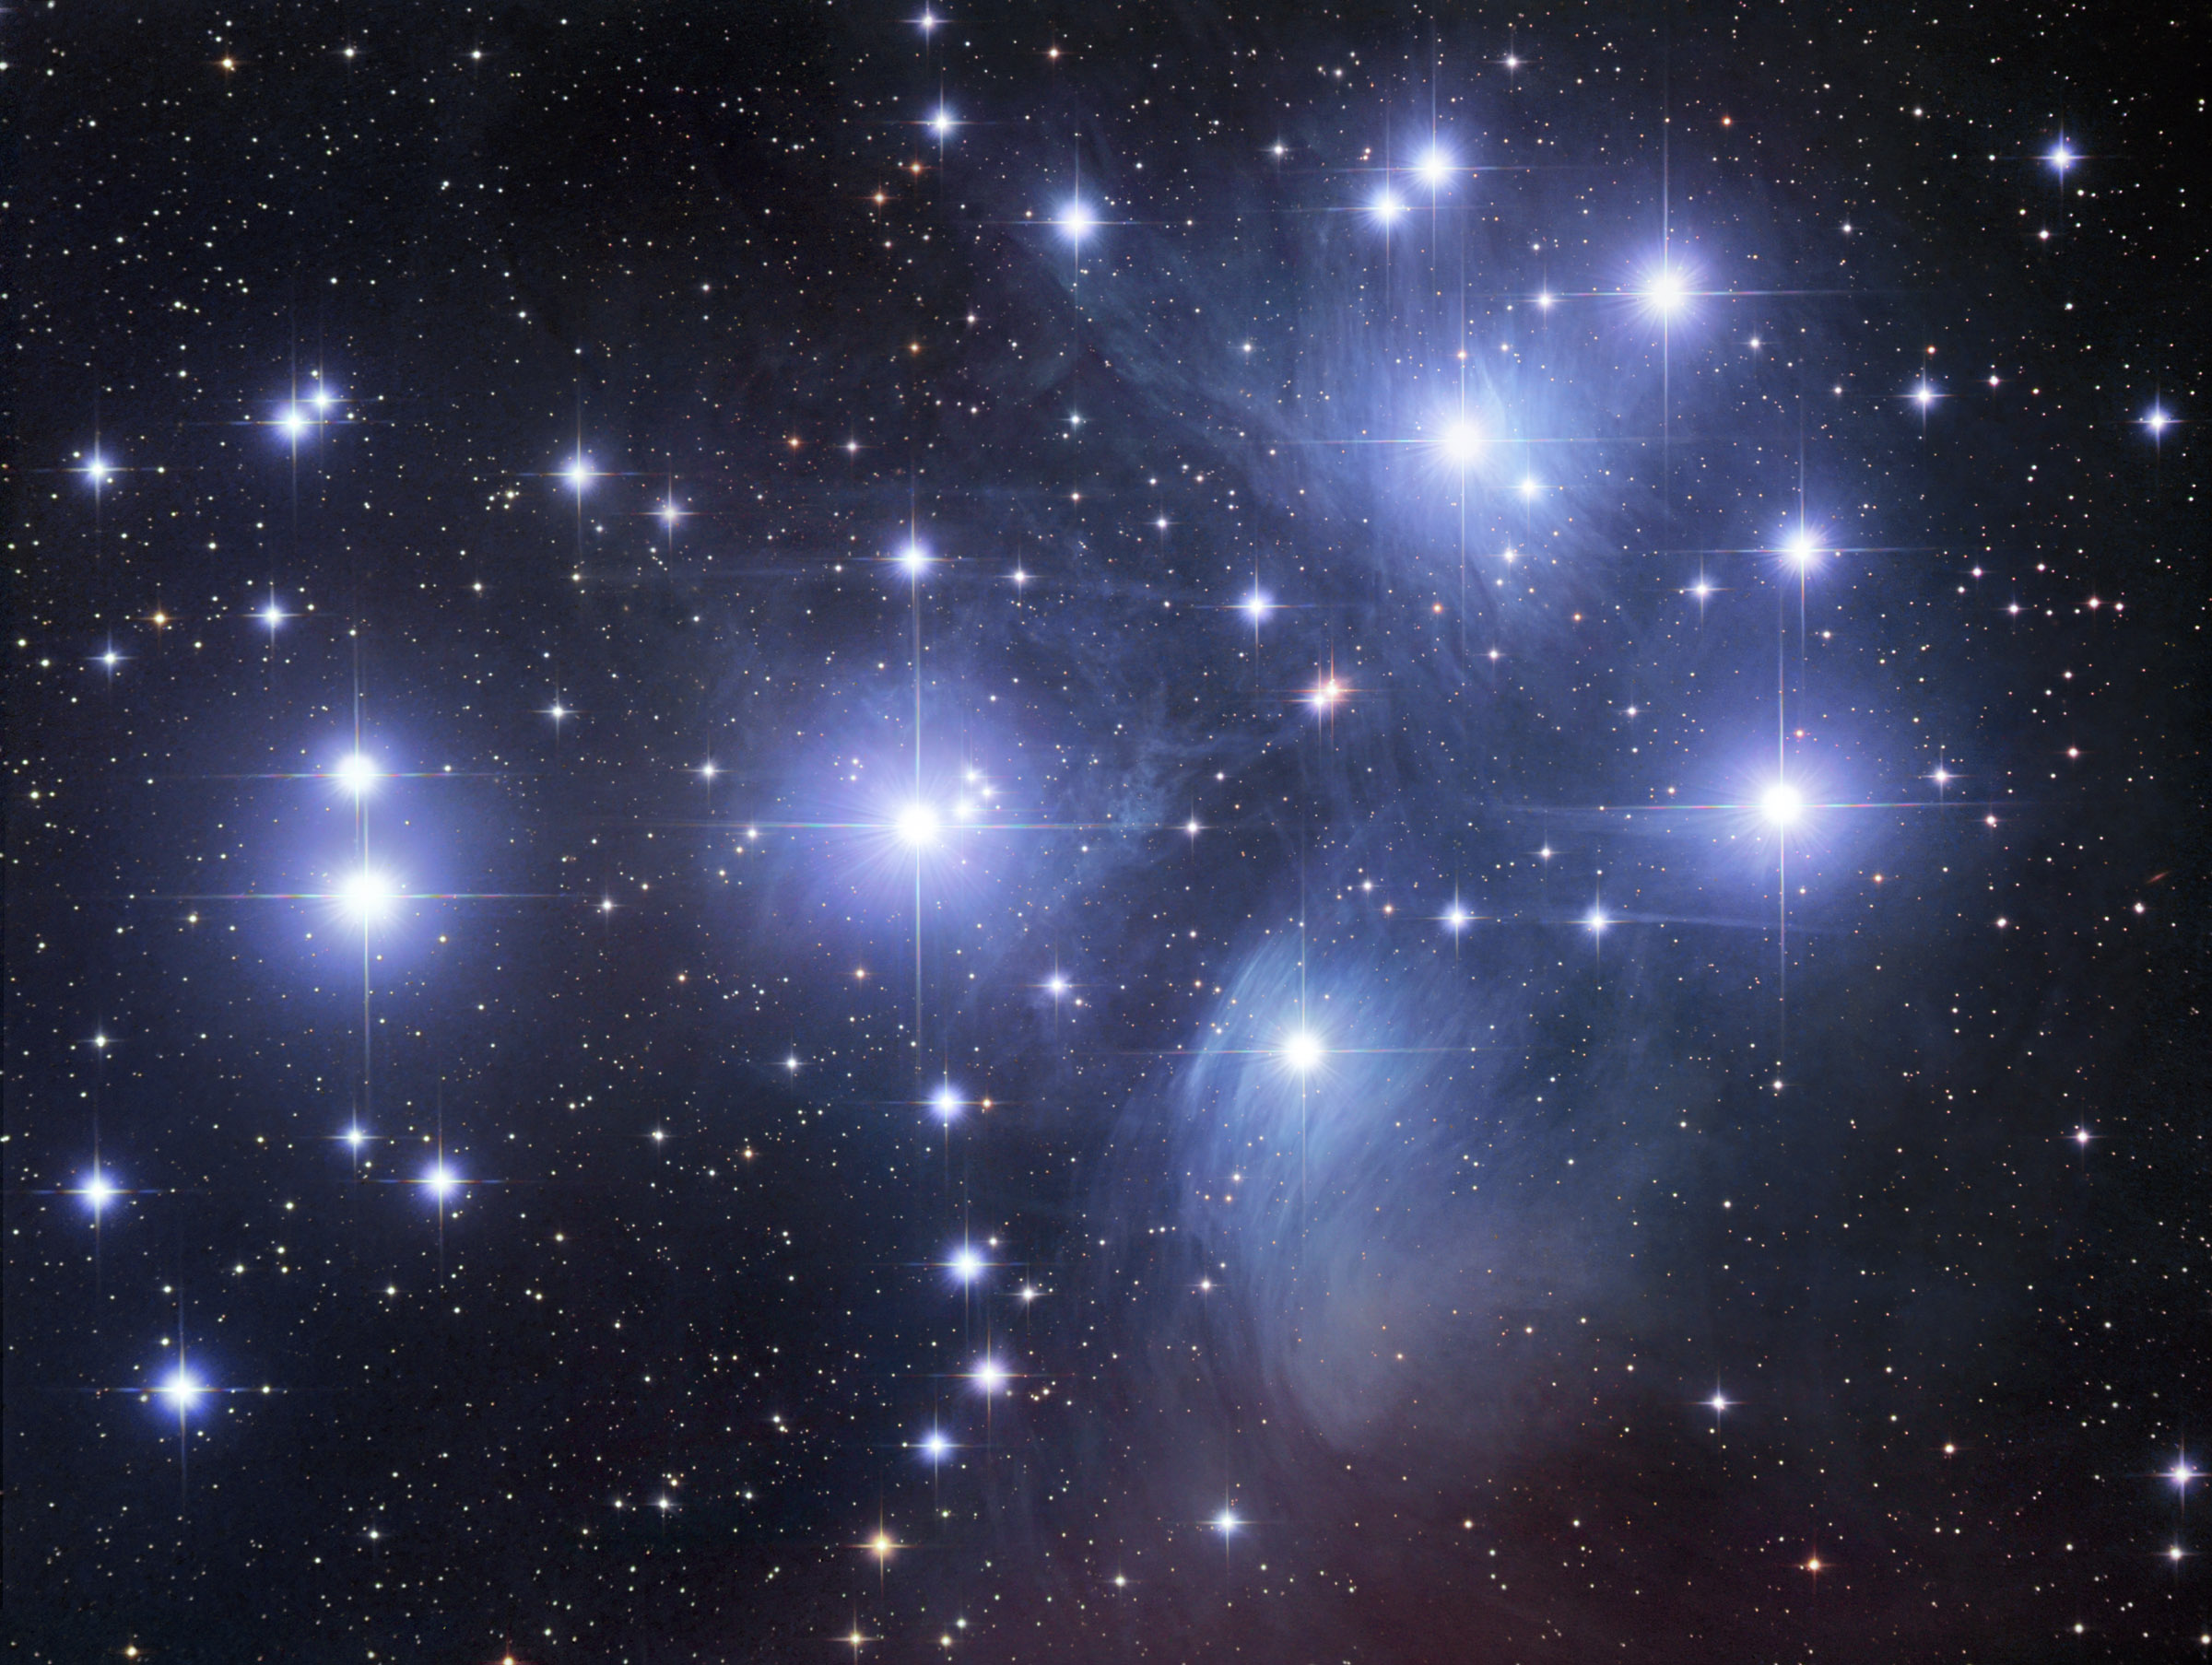 M45: The Pleiades Star Cluster